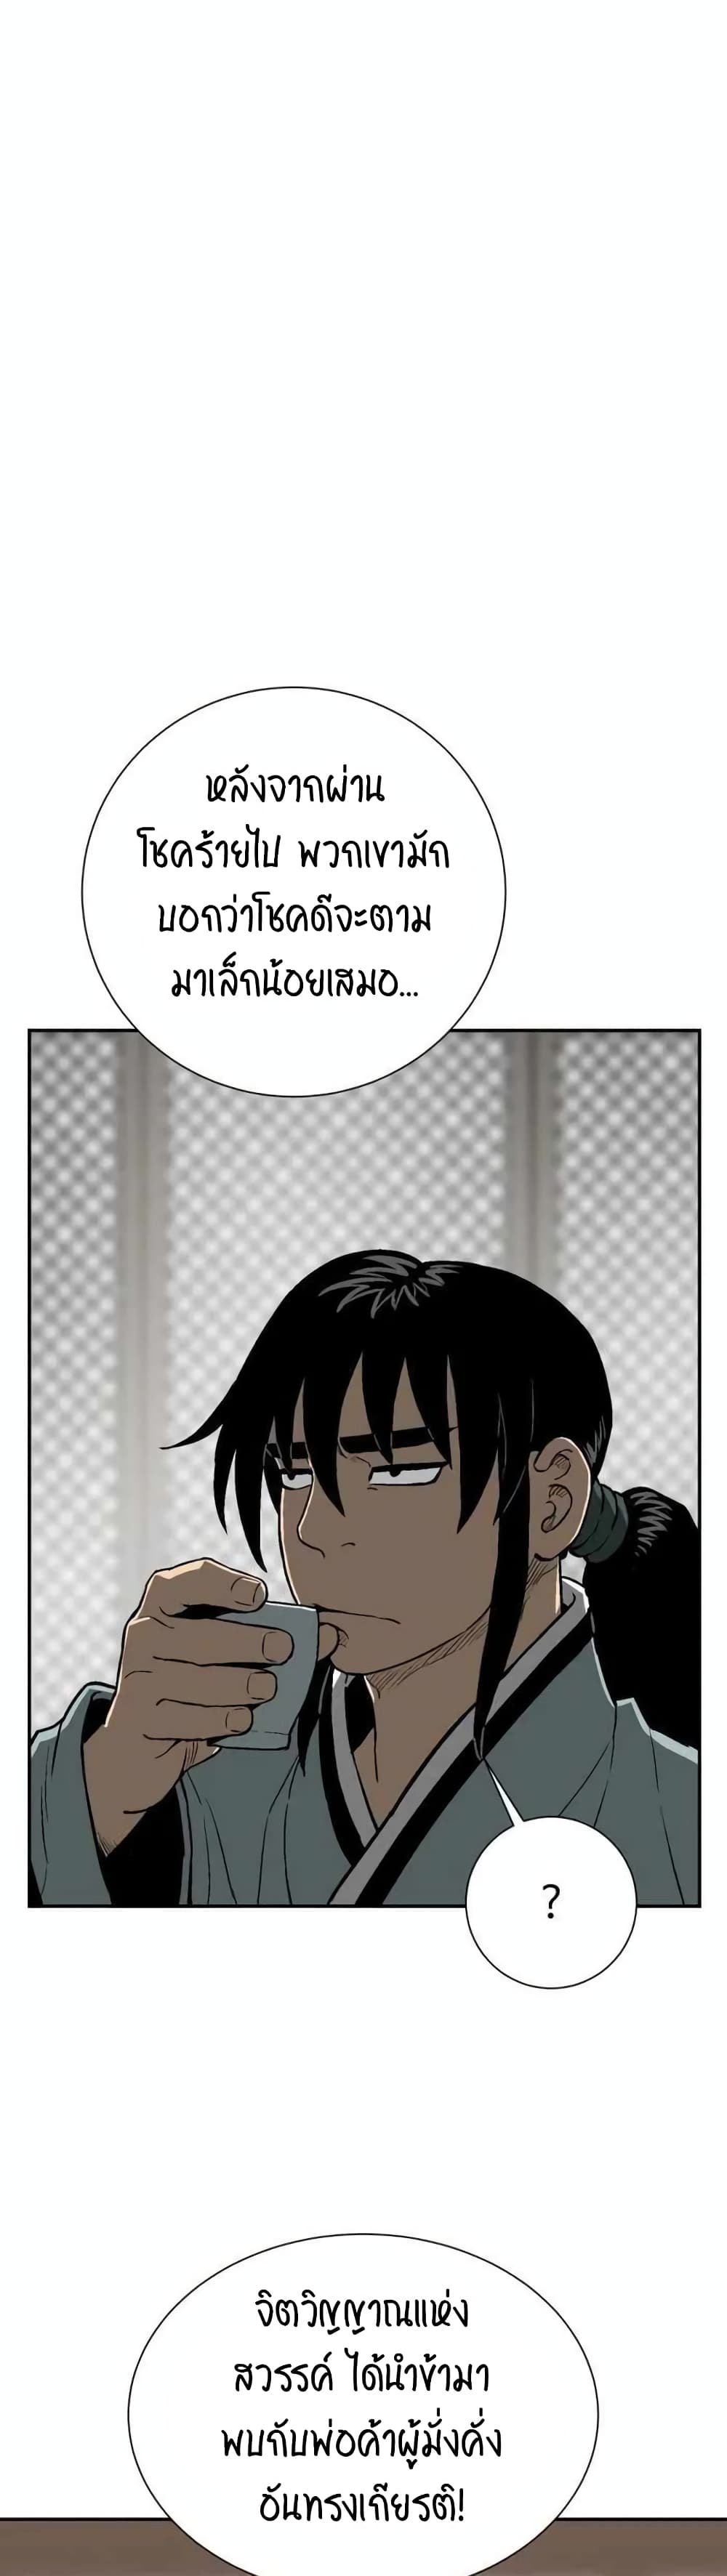 Tales of A Shinning Sword ตอนที่ 18 (36)